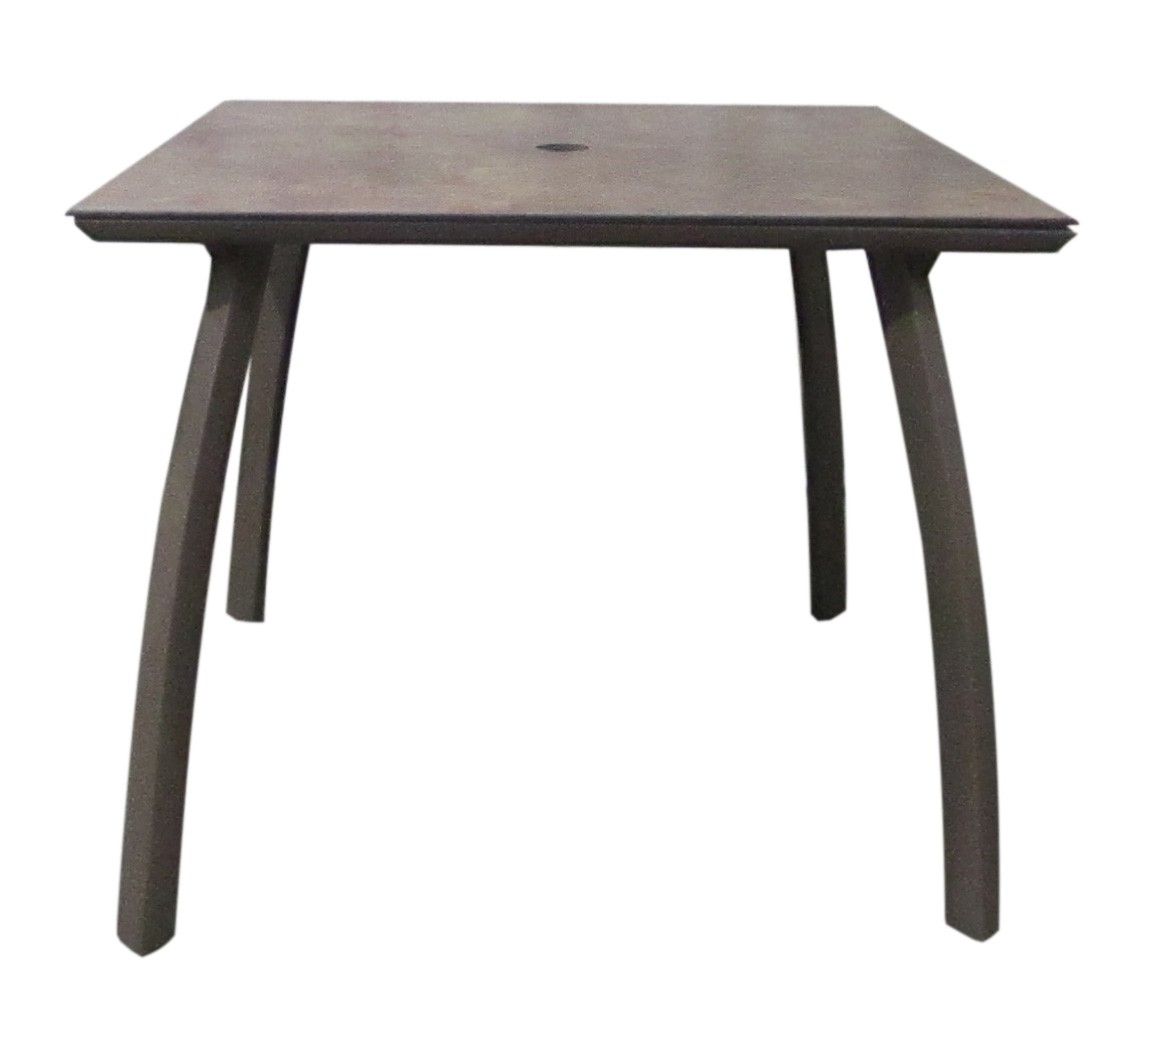 36  High Steel Table With Storage Shelf Details about  / Patio Festival